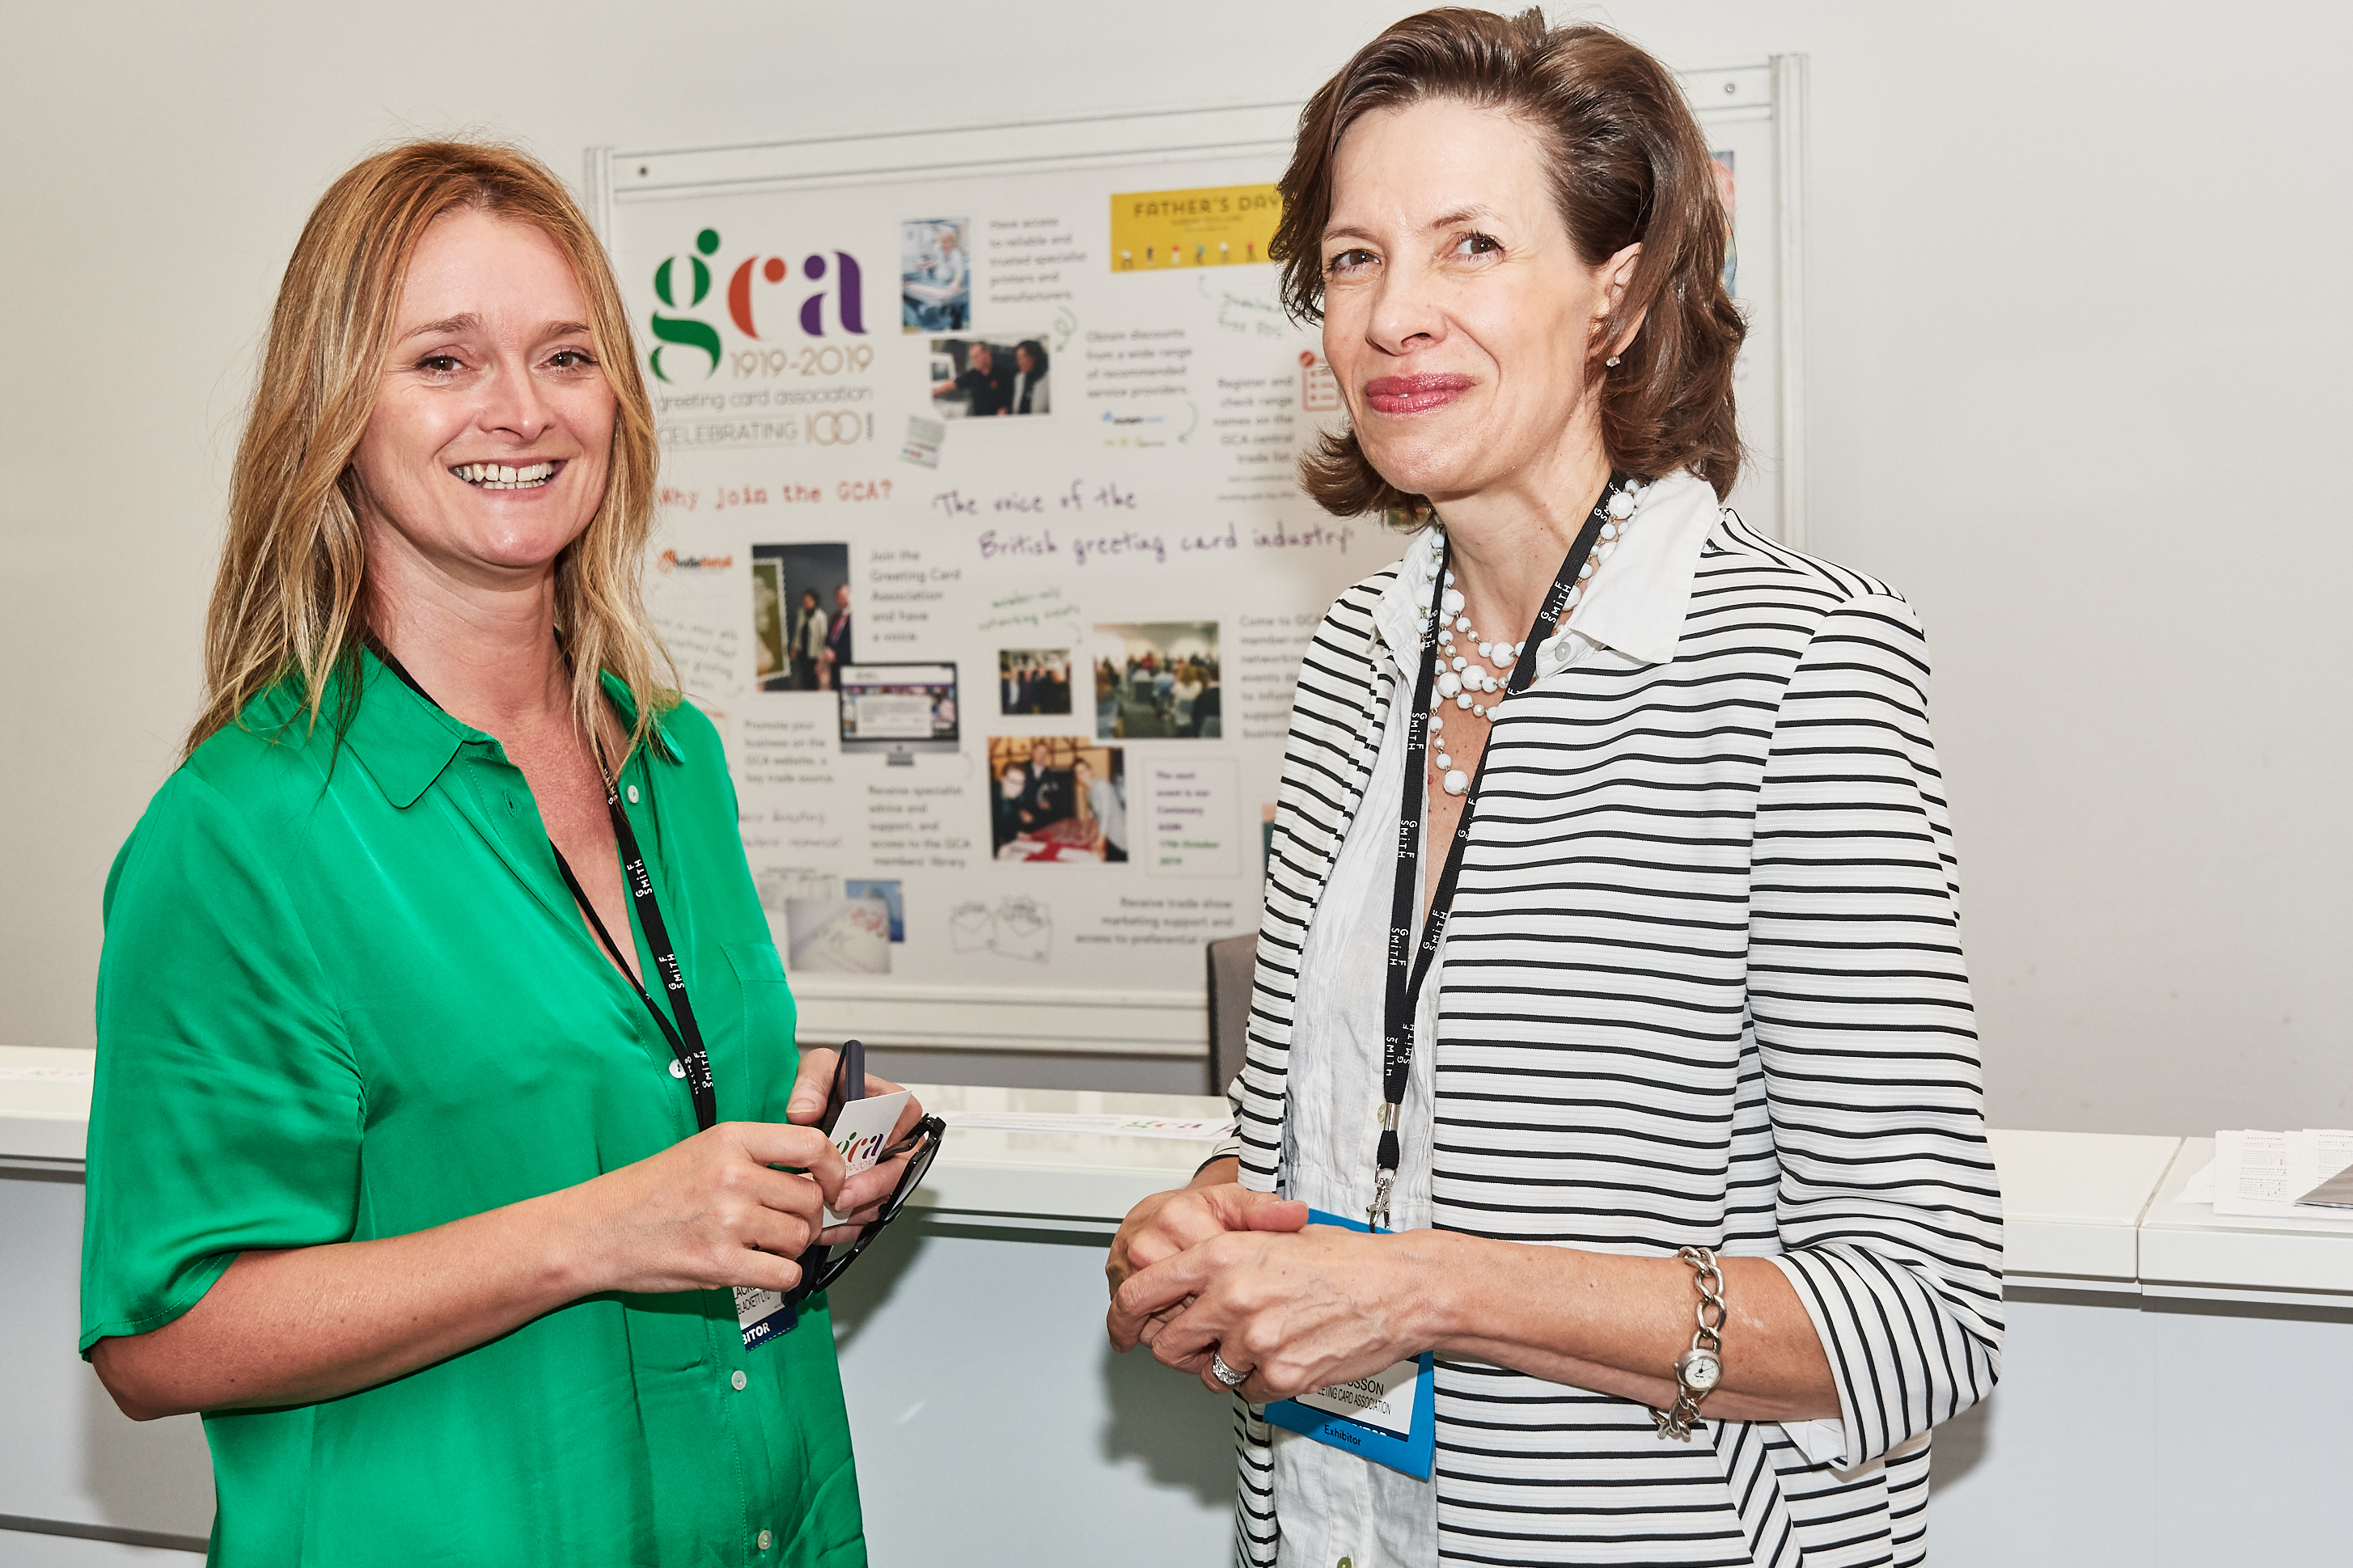 Above: GCA ceo Amanda Fergusson (right) discussing the plans for the association’s centenary with Wendy Jones-Blackett, the namesake of the card publishing business who is a leading light in the present industry. 